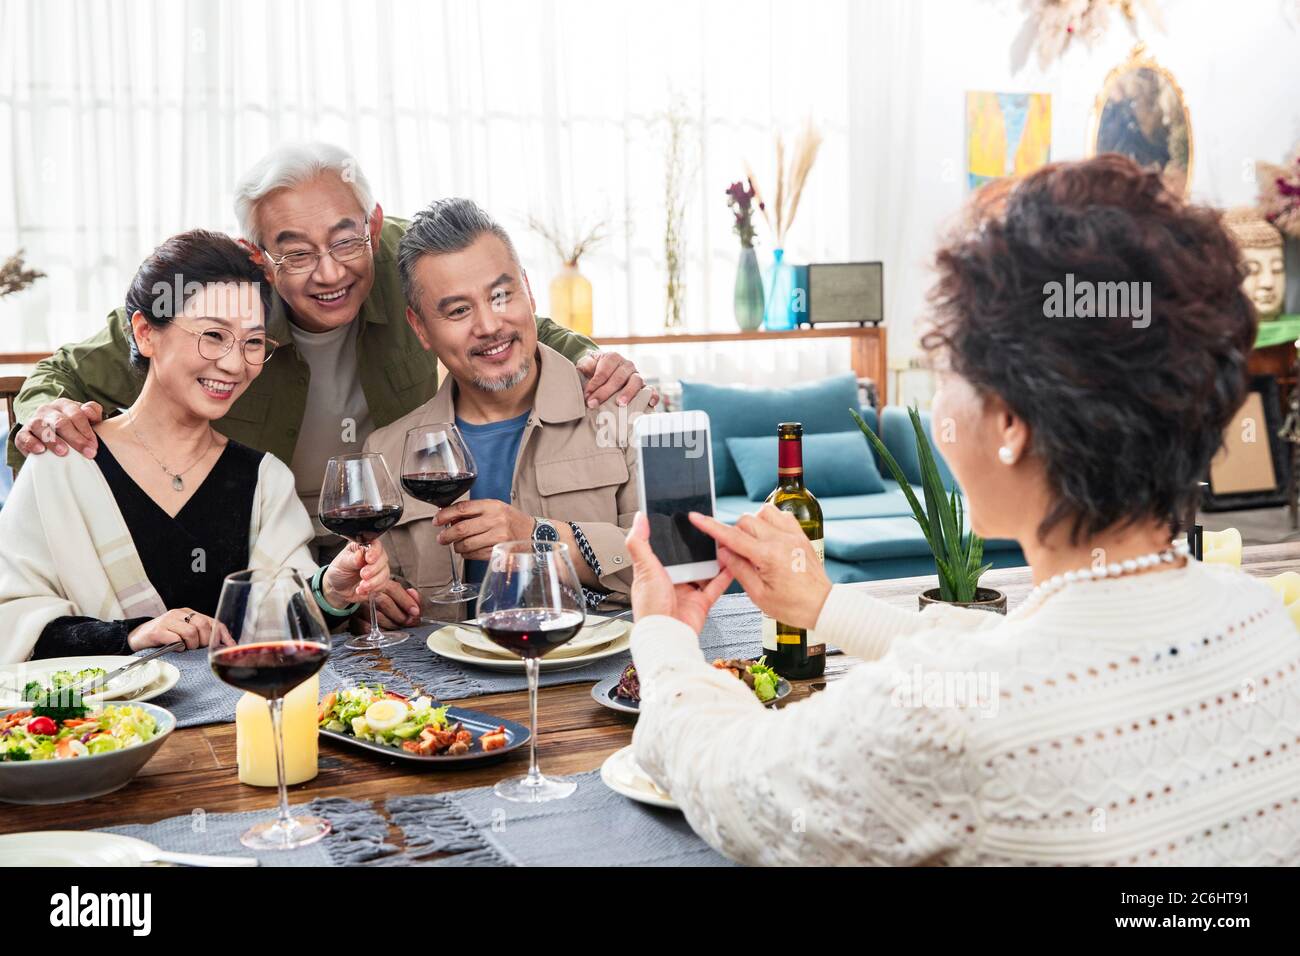 Happy dinner in old people use their phones to take pictures Stock Photo